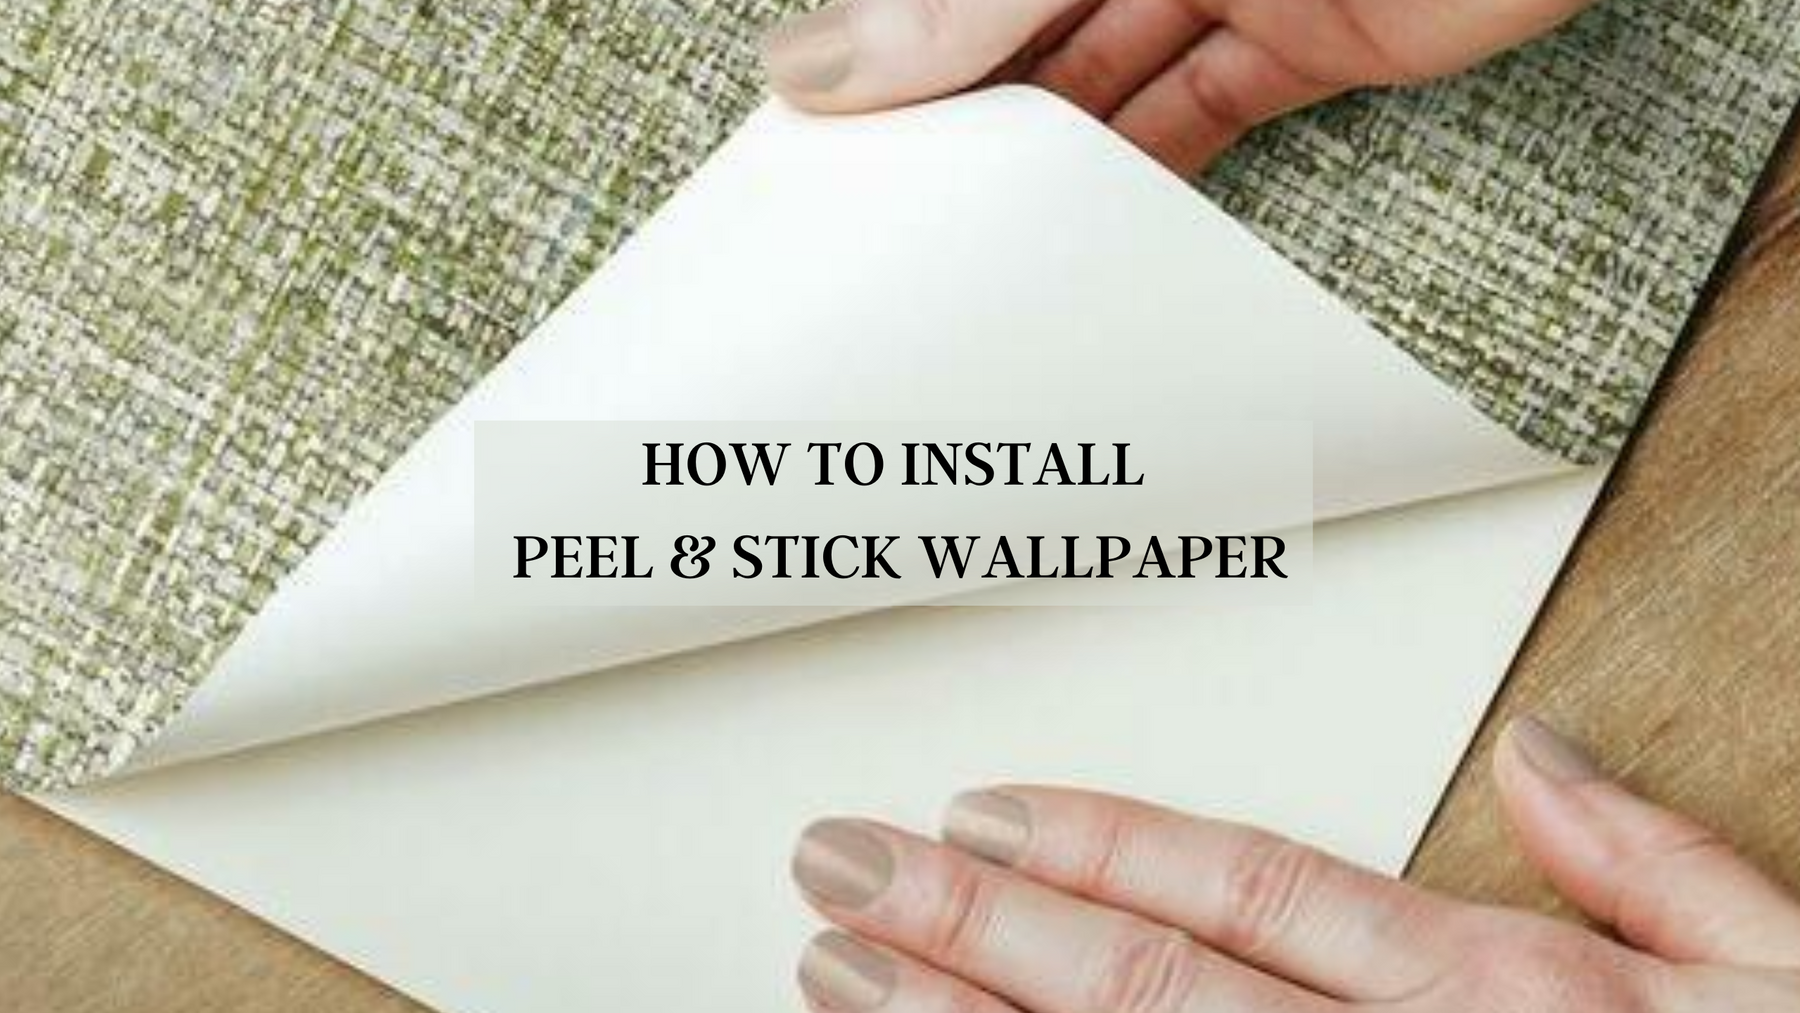 How to Install Peel & Stick Wallpaper